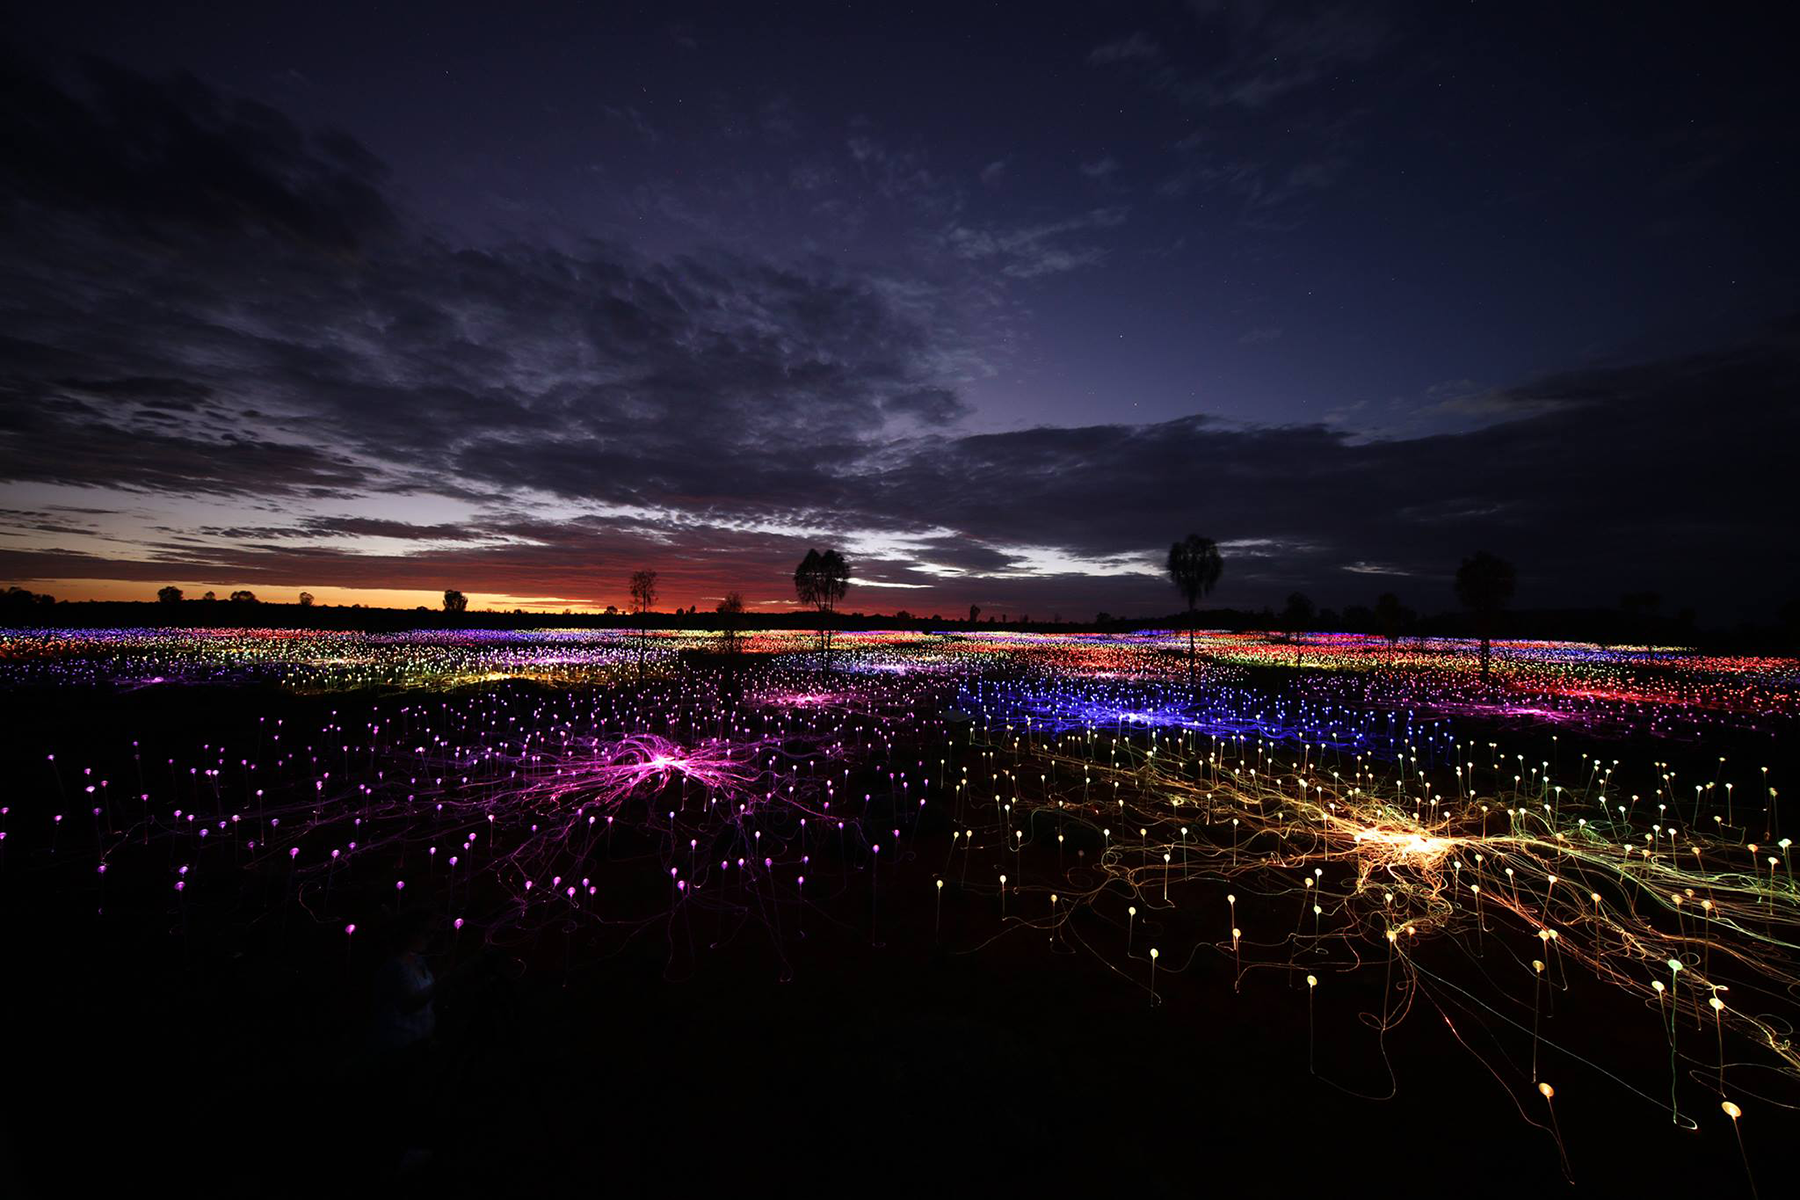 The Sensational “Field of Light” Installation Is Now on View in Paso